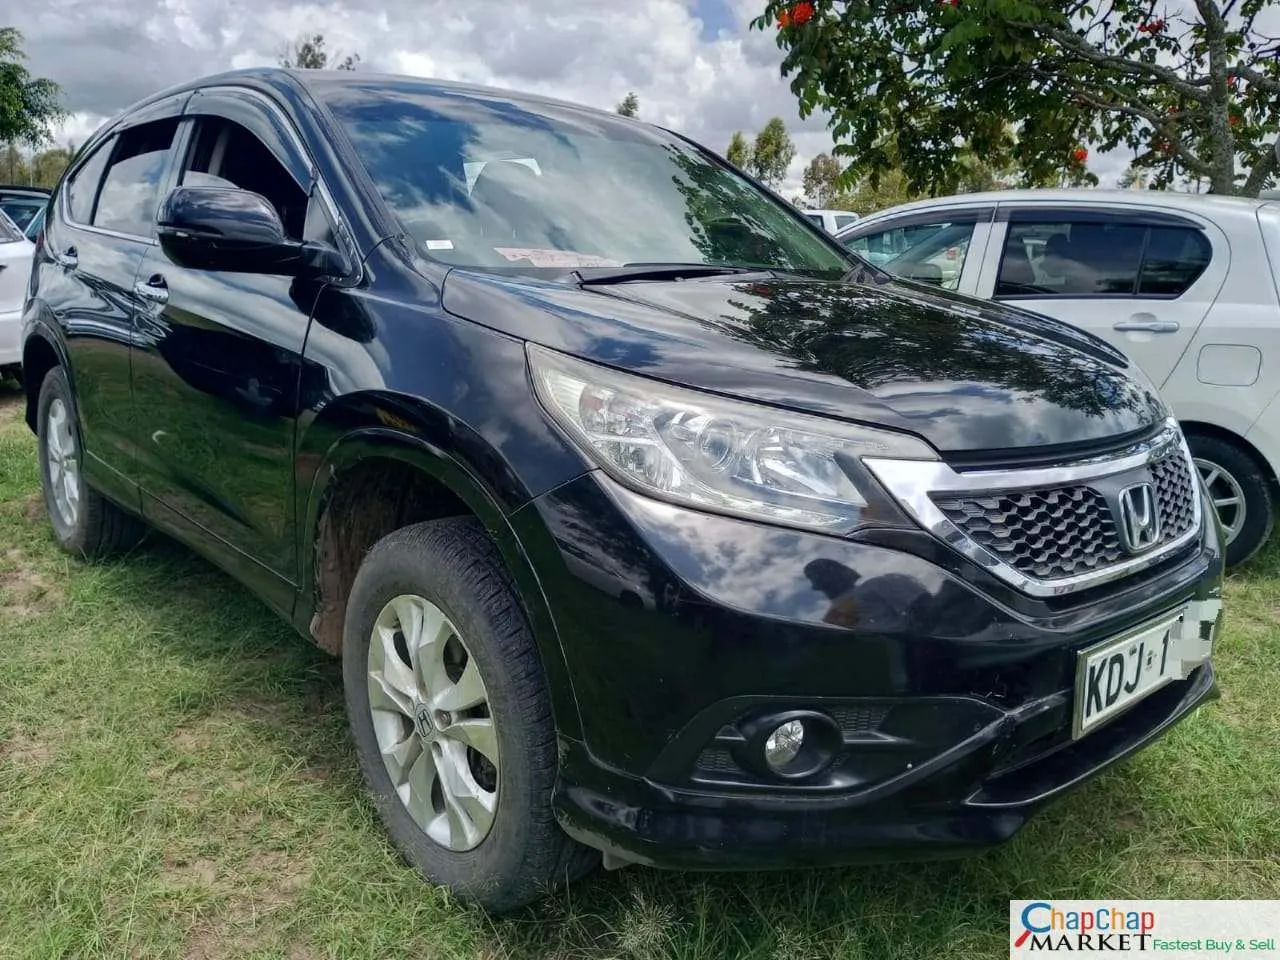 Cars Cars For Sale/Vehicles-Honda CRV Hot QUICK SALE You Pay 30% Deposit Trade in OK installments EXCLUSIVE